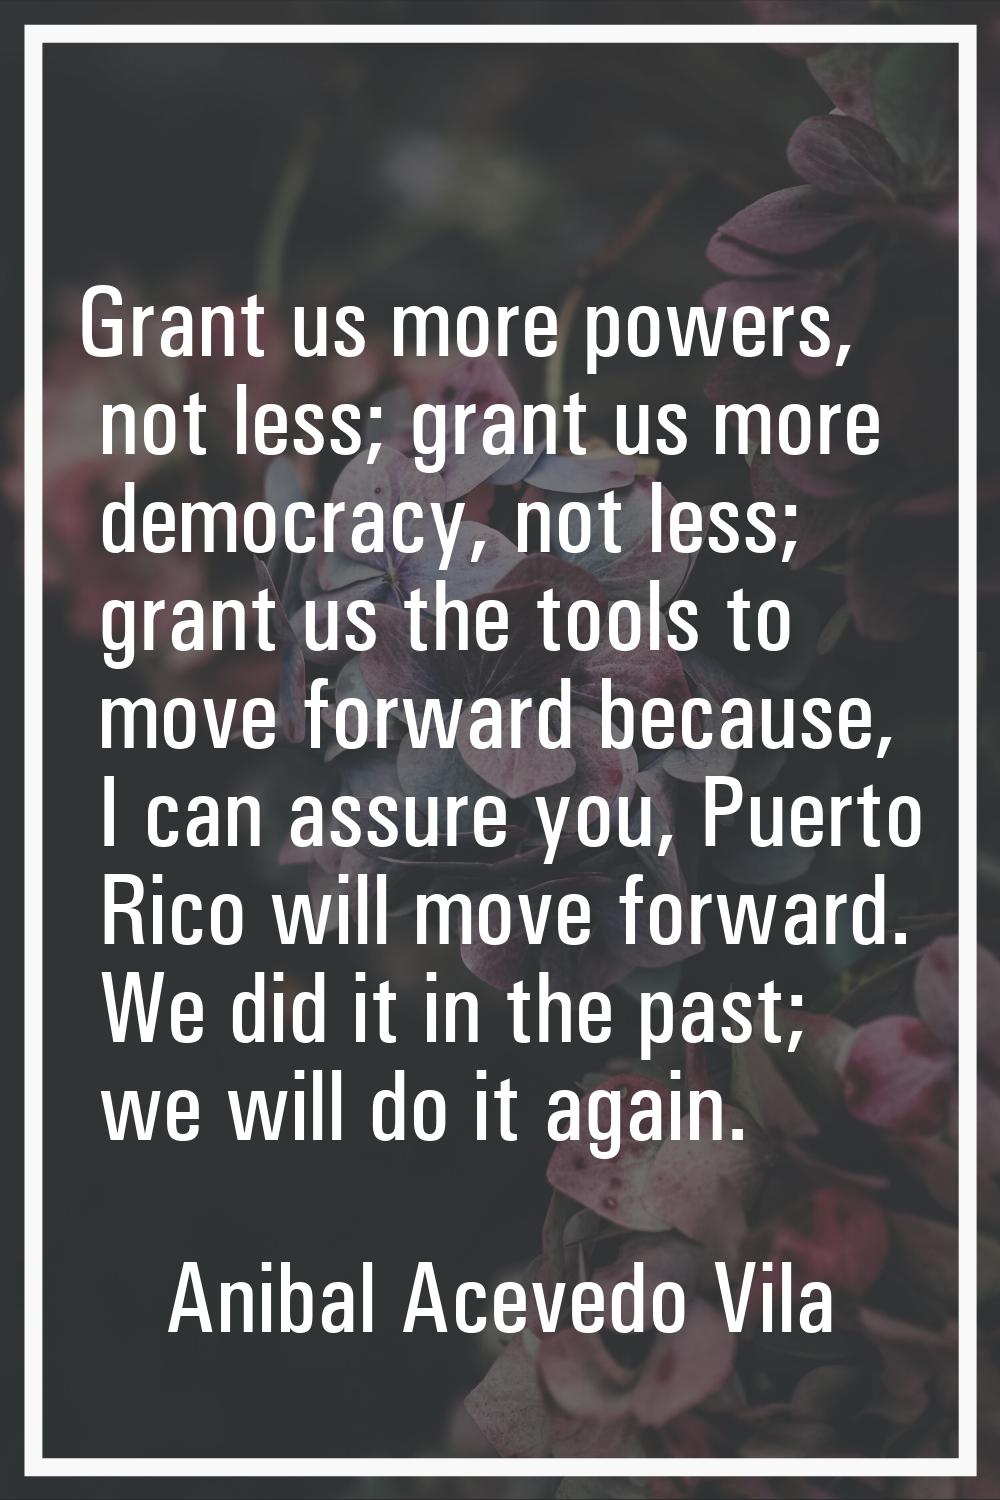 Grant us more powers, not less; grant us more democracy, not less; grant us the tools to move forwa